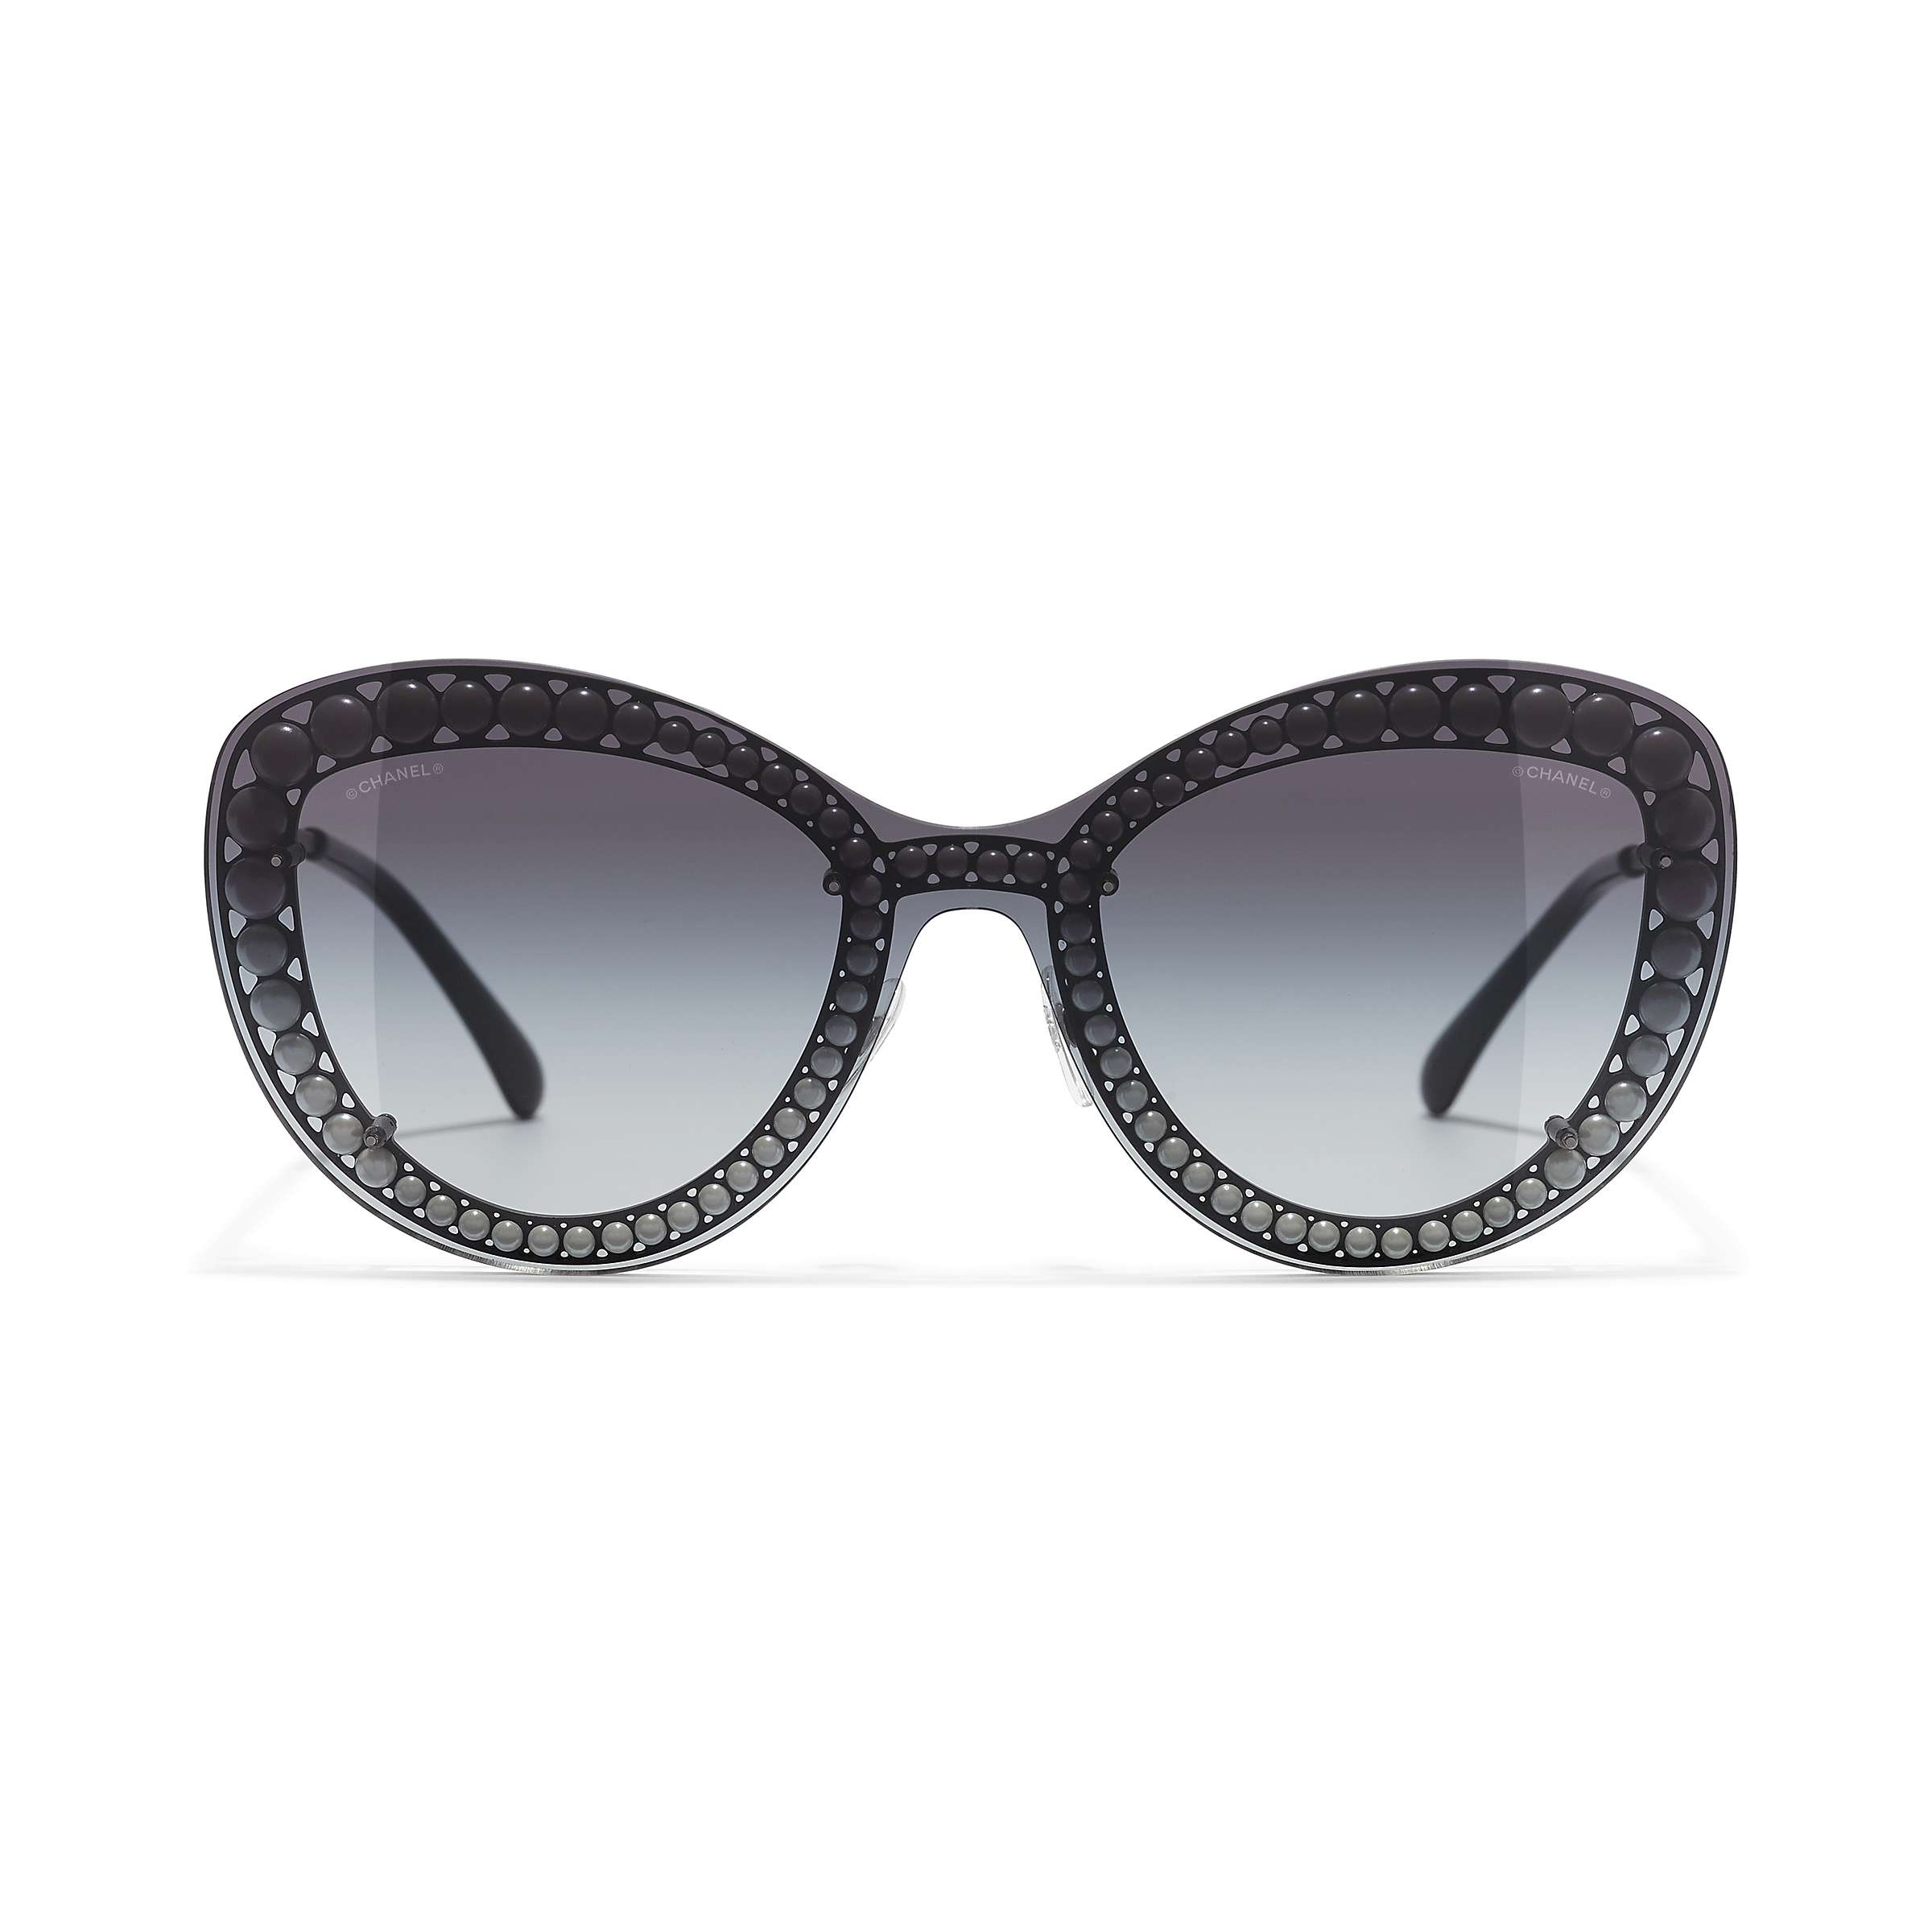 Buy CHANEL Butterfly Sunglasses CH4236H Black Online at johnlewis.com